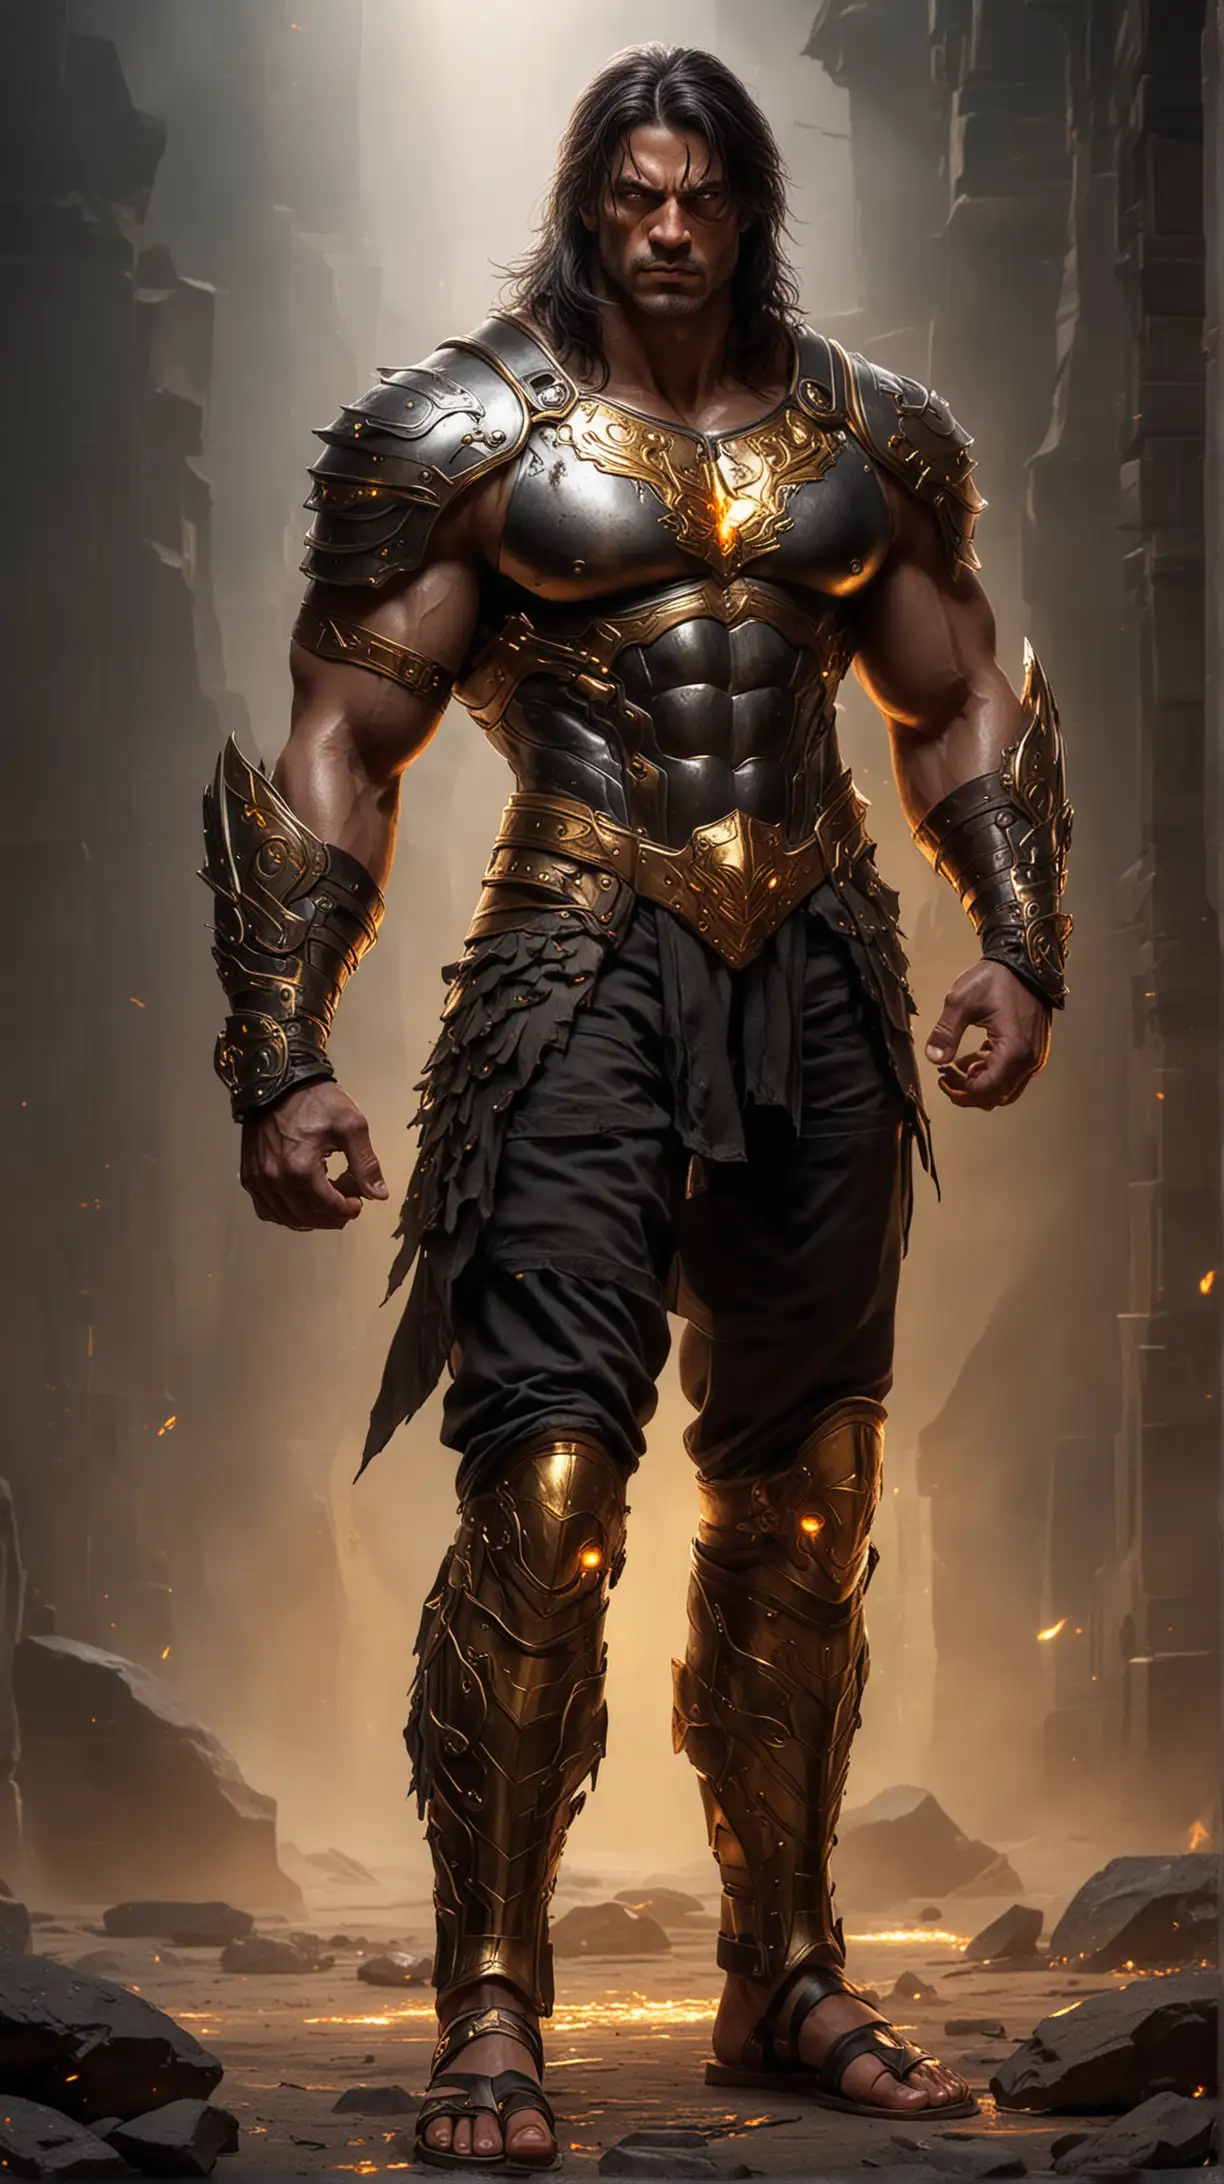 a powerful muscular man, gazing with gold glowing eyes, wearing sandals, wearing armor, dark colored hair